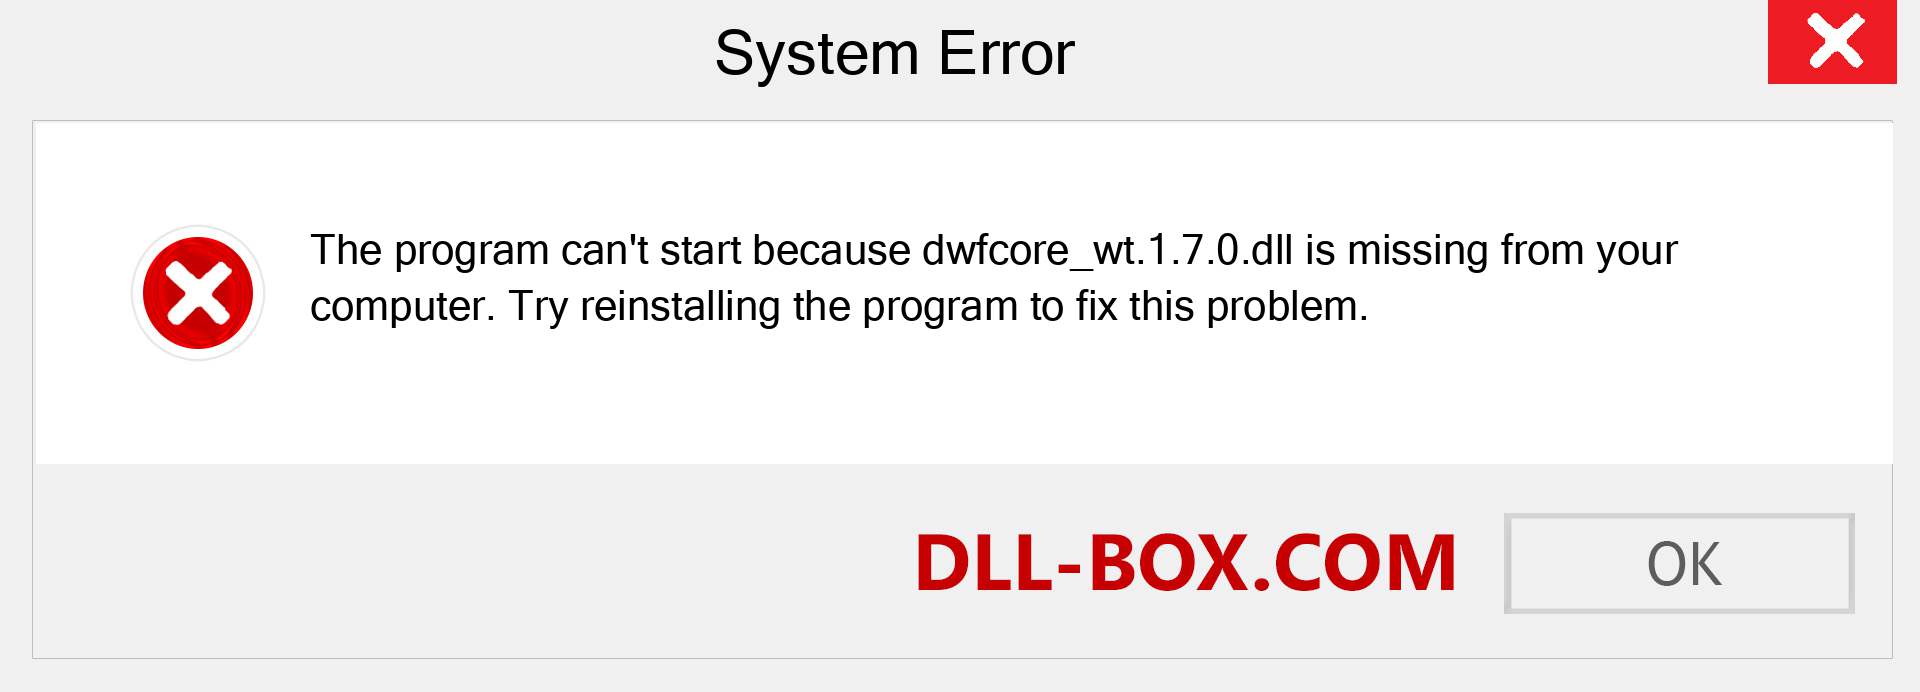  dwfcore_wt.1.7.0.dll file is missing?. Download for Windows 7, 8, 10 - Fix  dwfcore_wt.1.7.0 dll Missing Error on Windows, photos, images